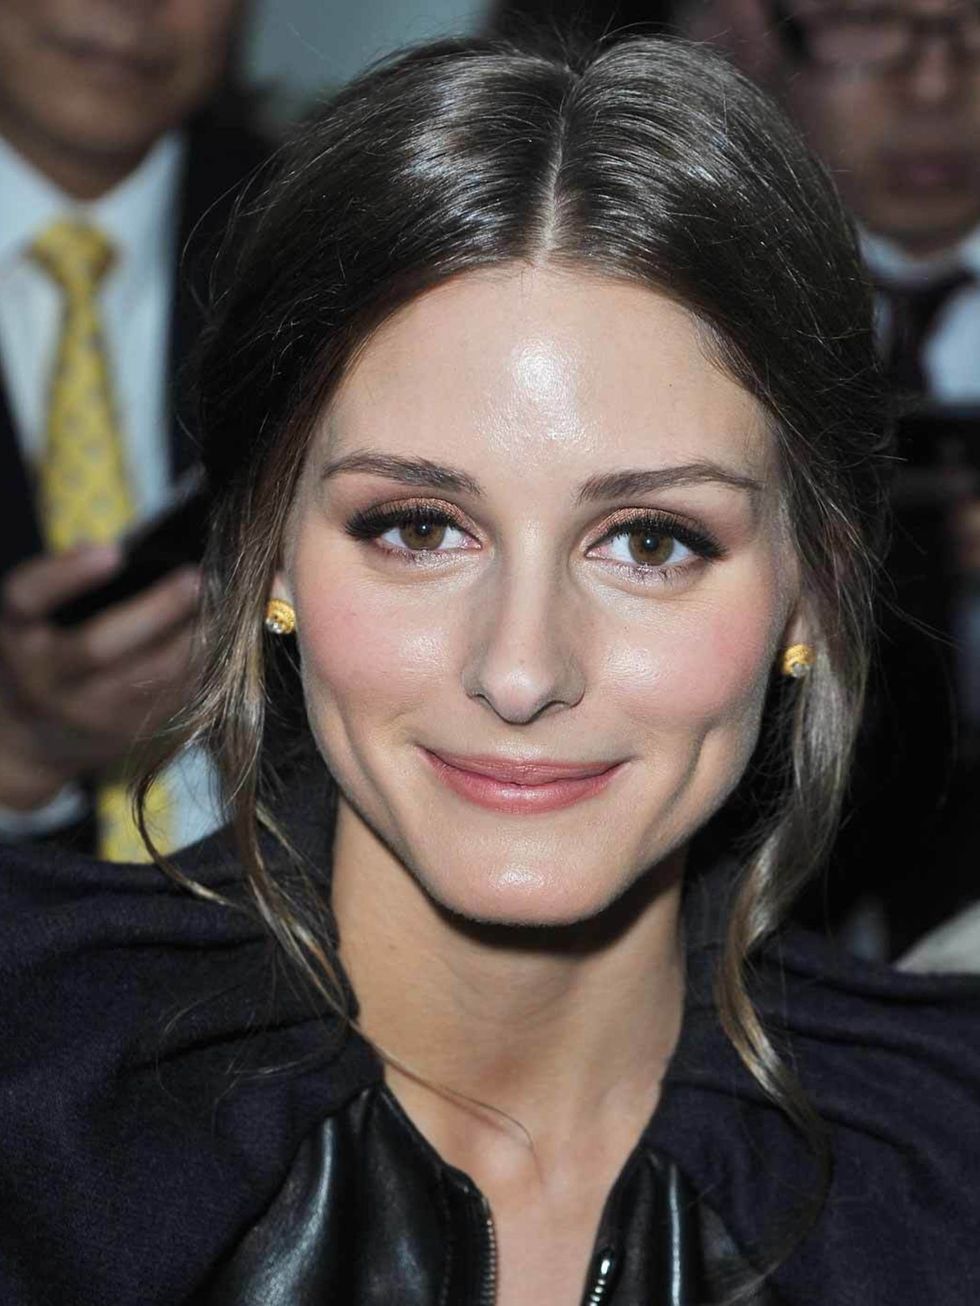 <p><strong>Olivia Palermo</strong></p><p>Does <a href="http://www.elleuk.com/star-style/special-features/olivia-palermo-s-lfw-style">Olivia Palermo</a> ever get it wrong? Front row at <a href="http://www.elleuk.com/catwalk/designer-a-z/christian-dior/spri